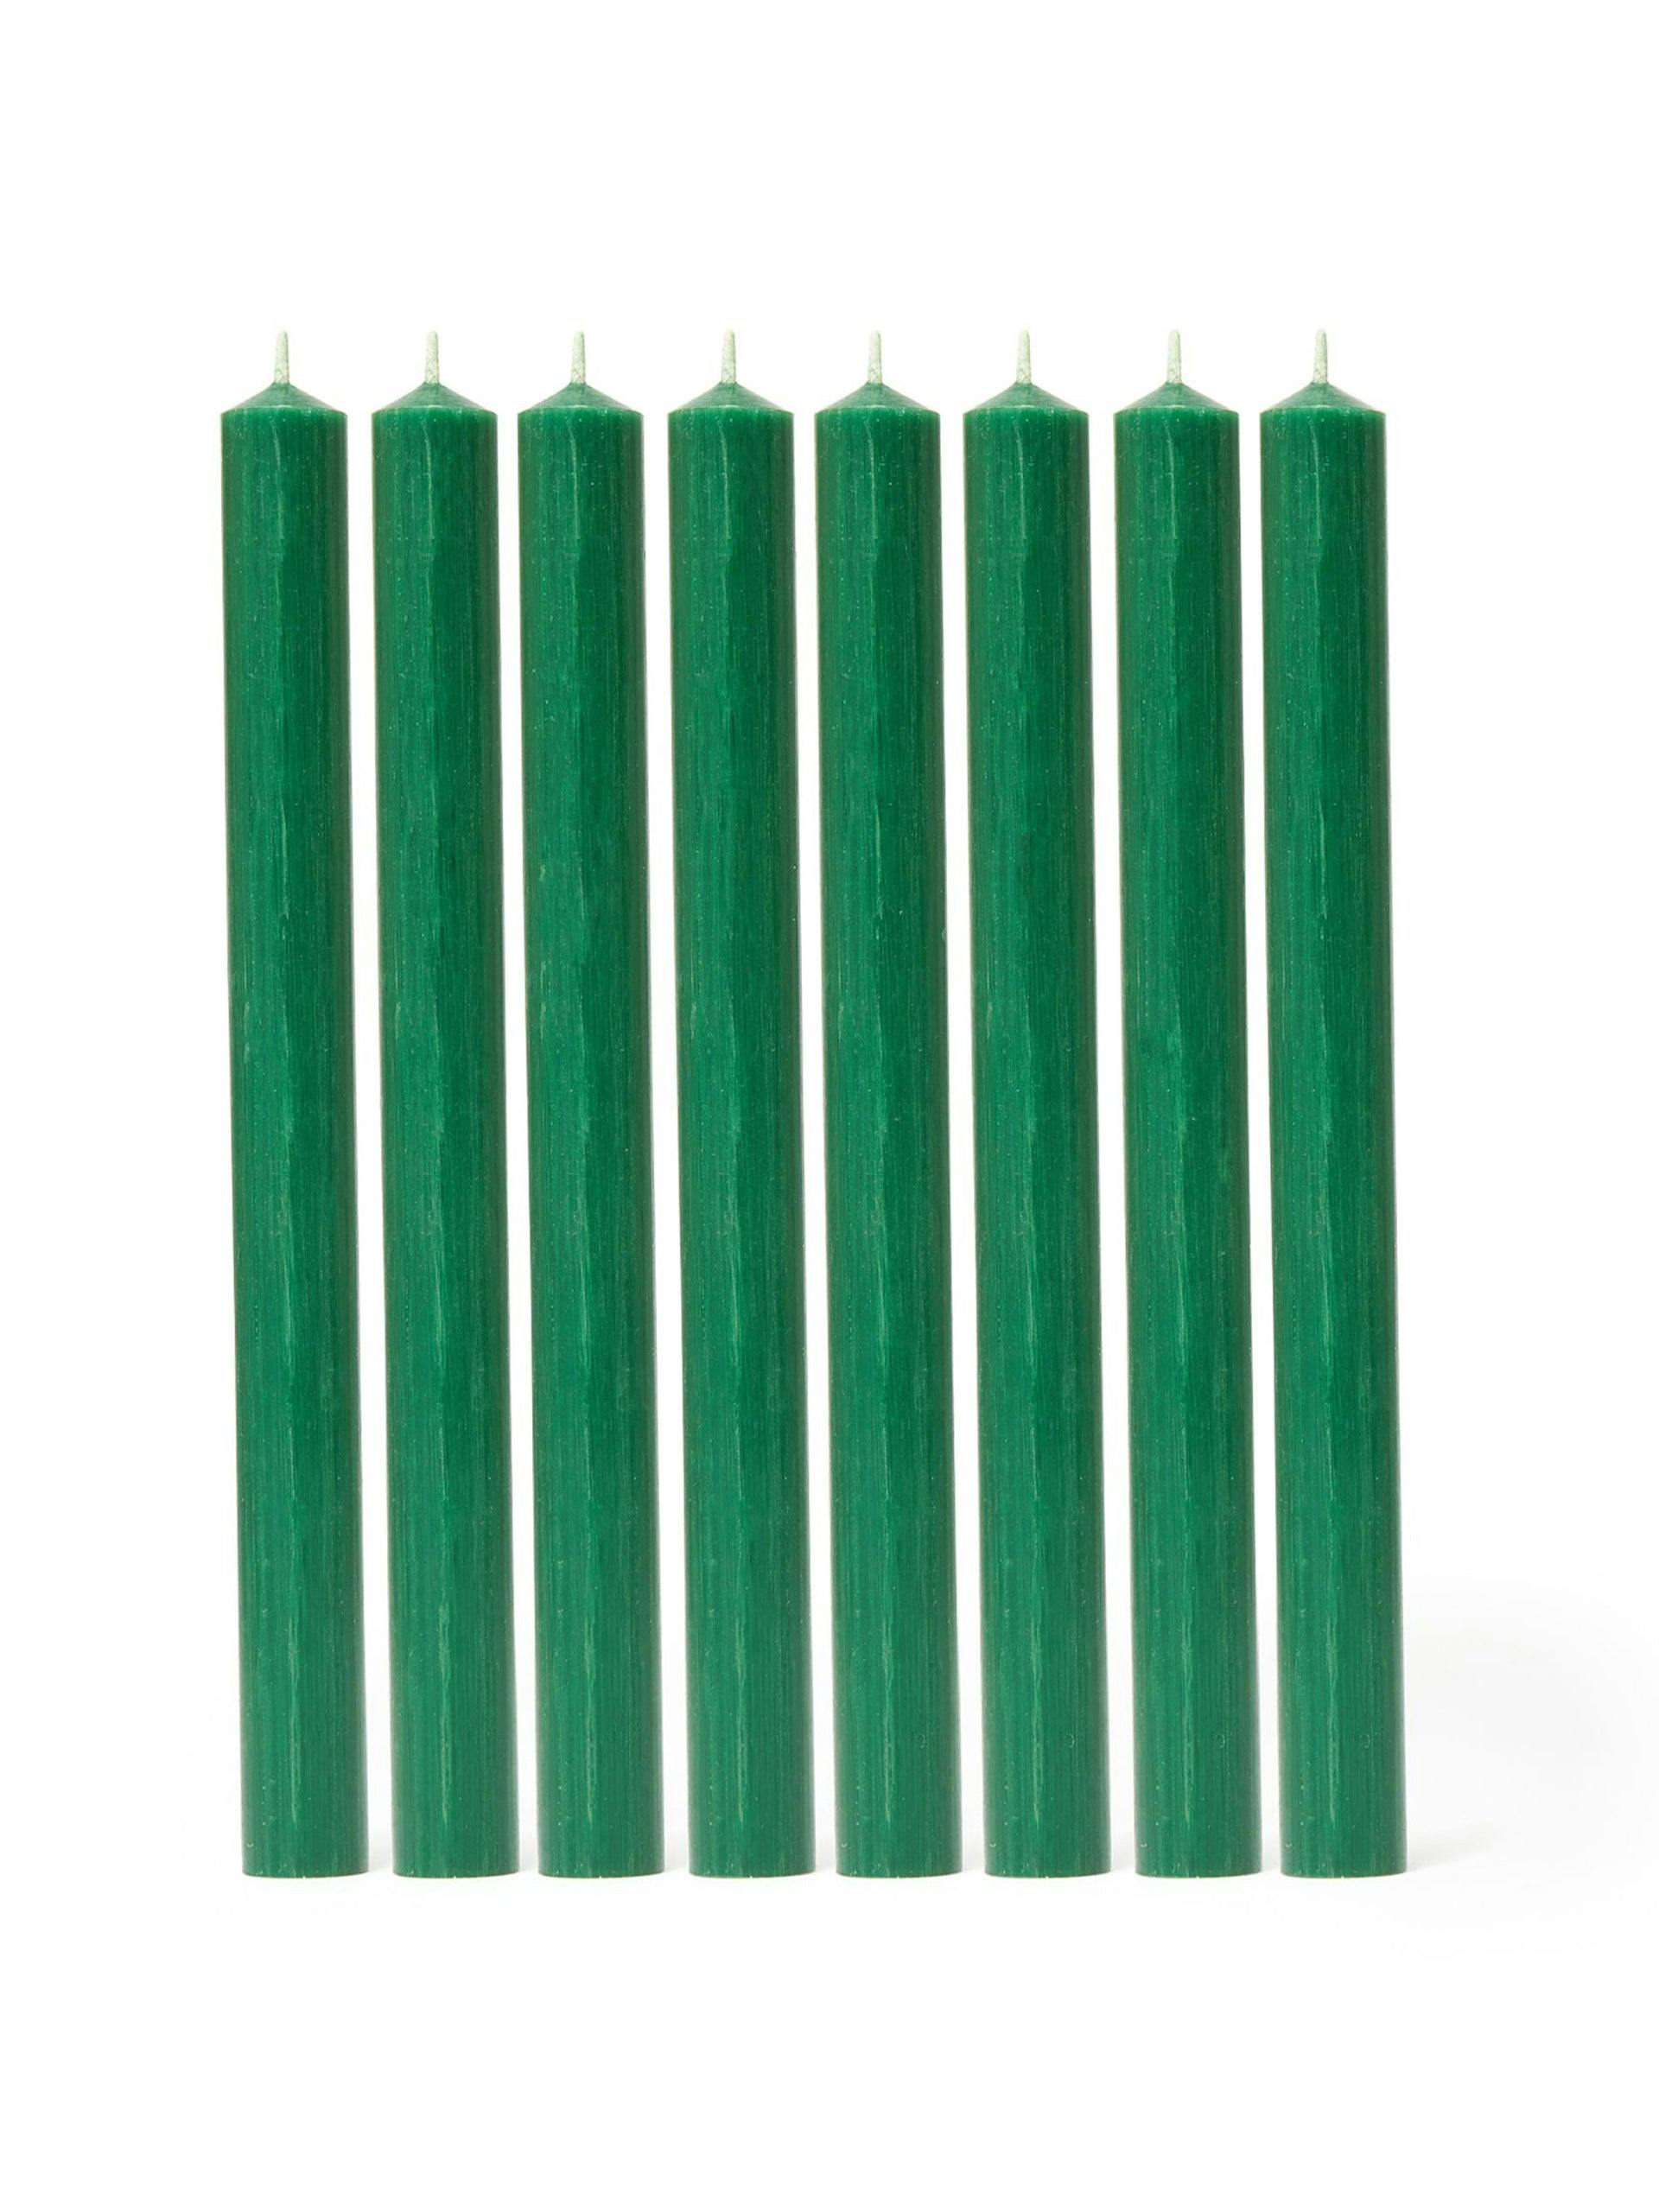 Dinner candles (set of 8)